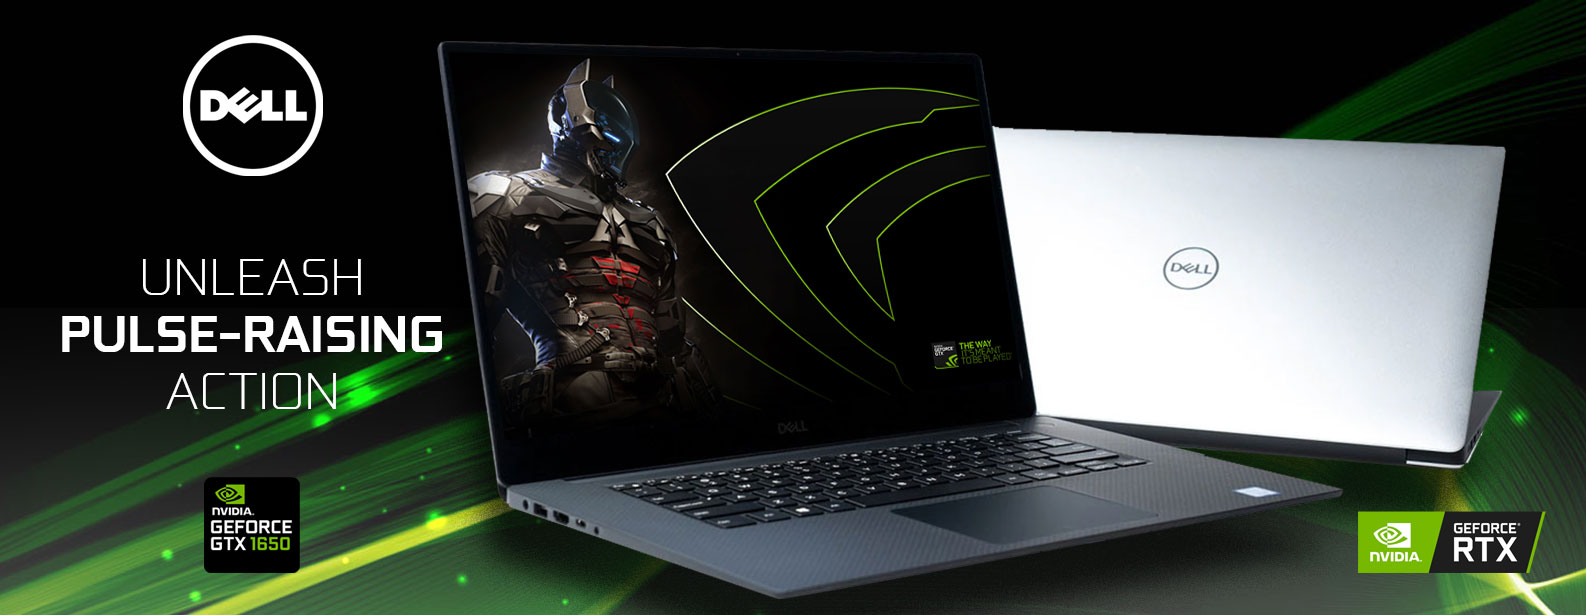 DELL GTX 1650 Gaming Laptops - South Africa